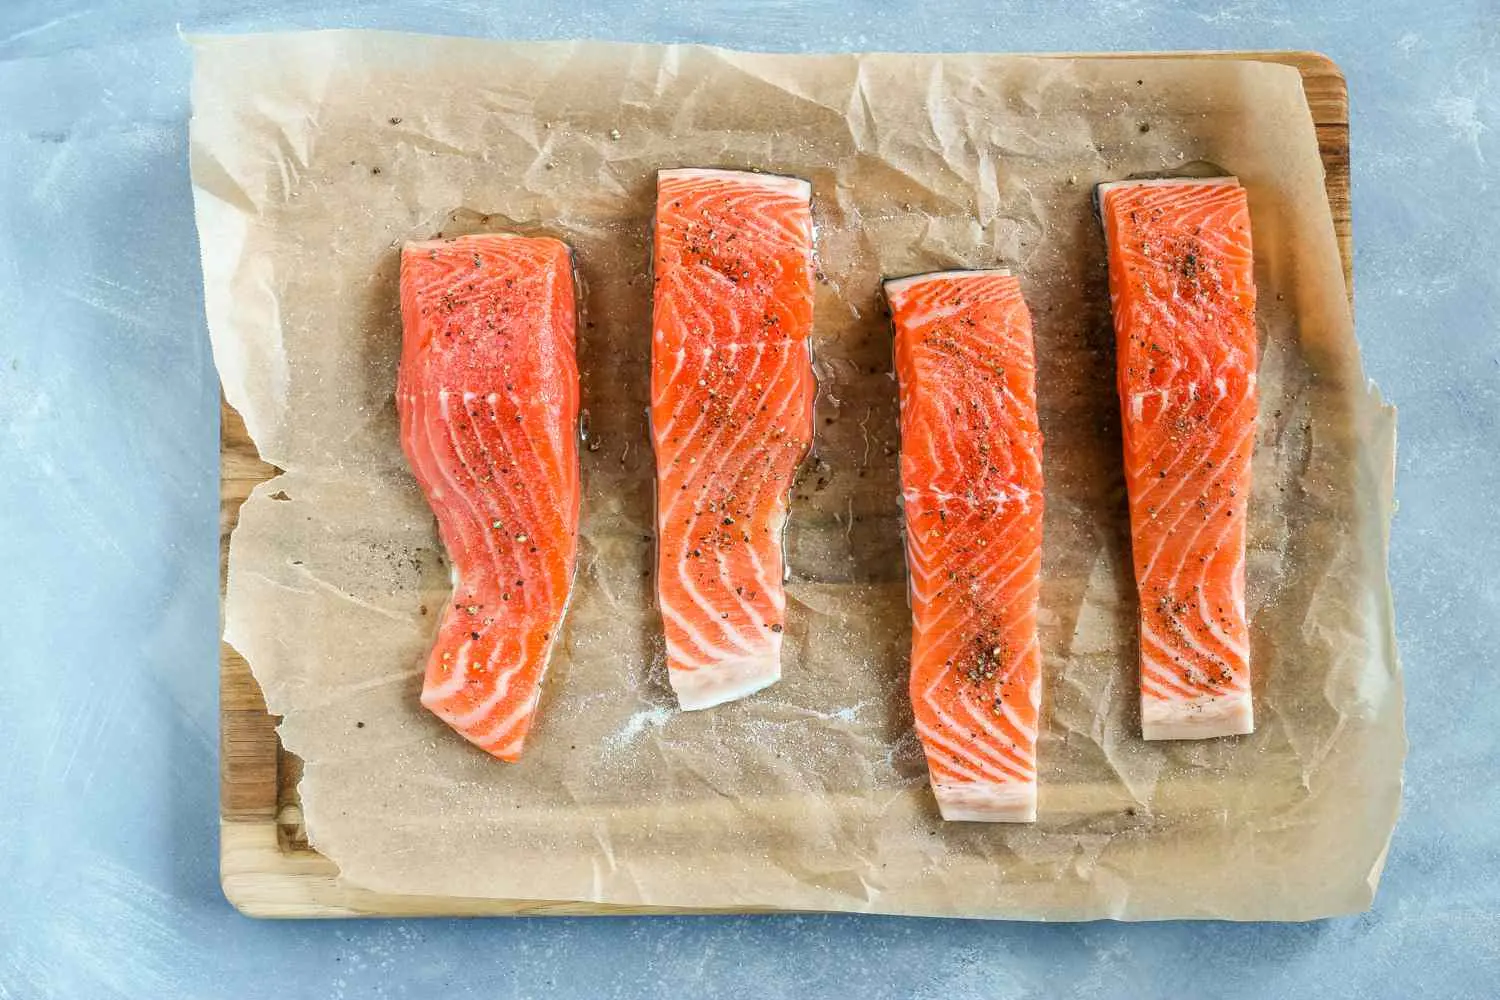 allergic to smoked salmon - Can you have an allergy to smoked salmon